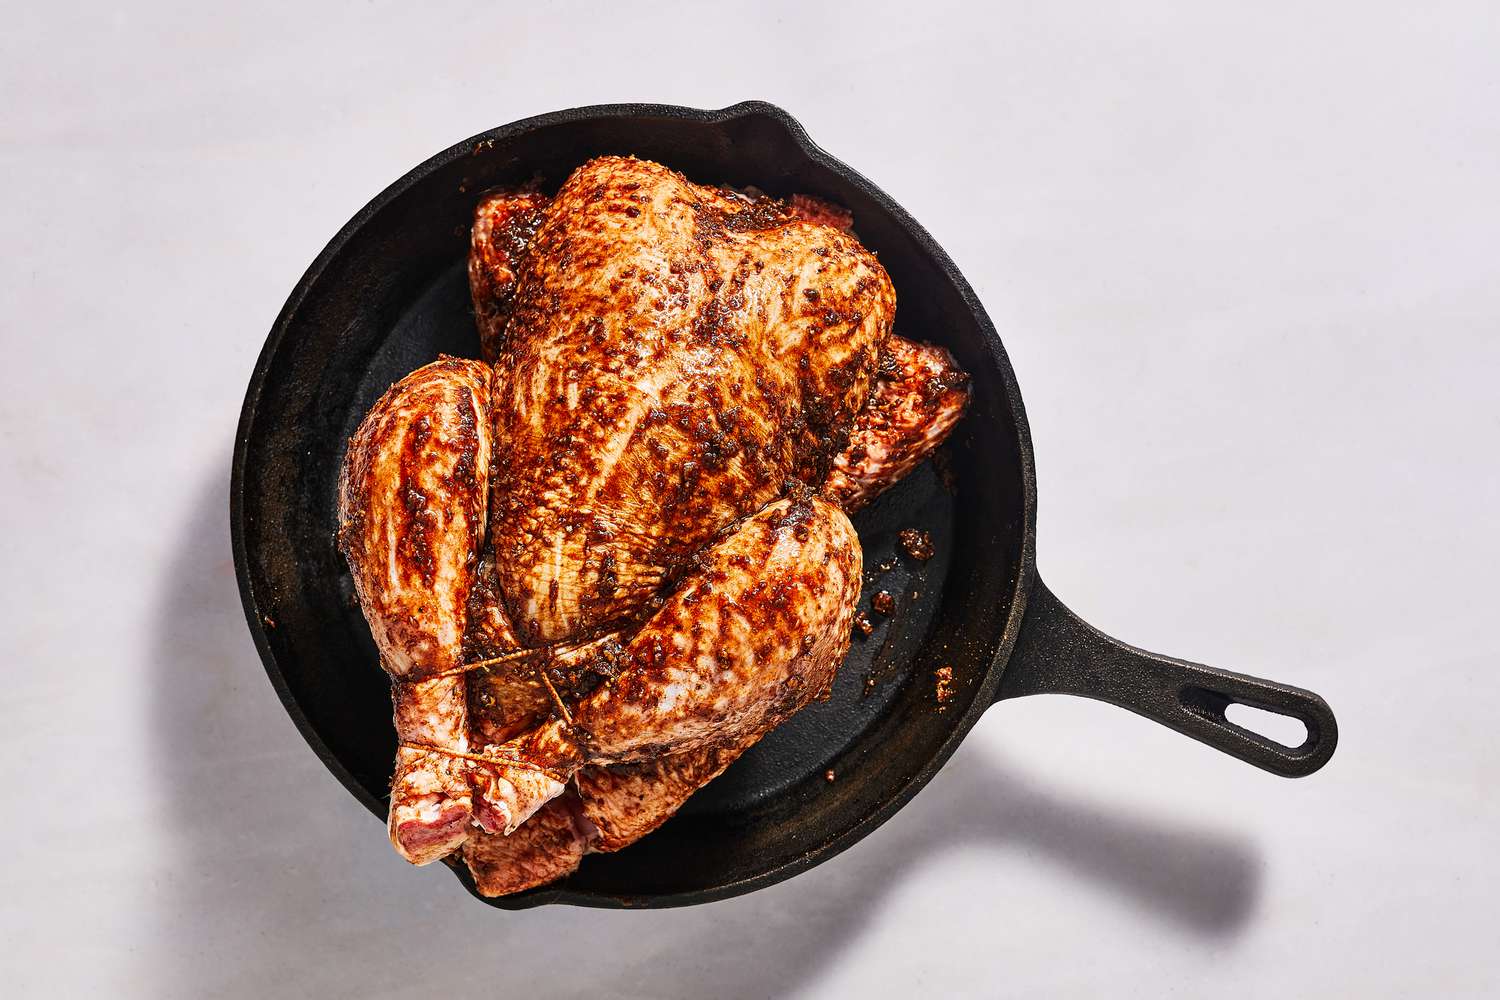 A trussed, whole chicken in a cast iron skillet coasted in the spice-oil mixture